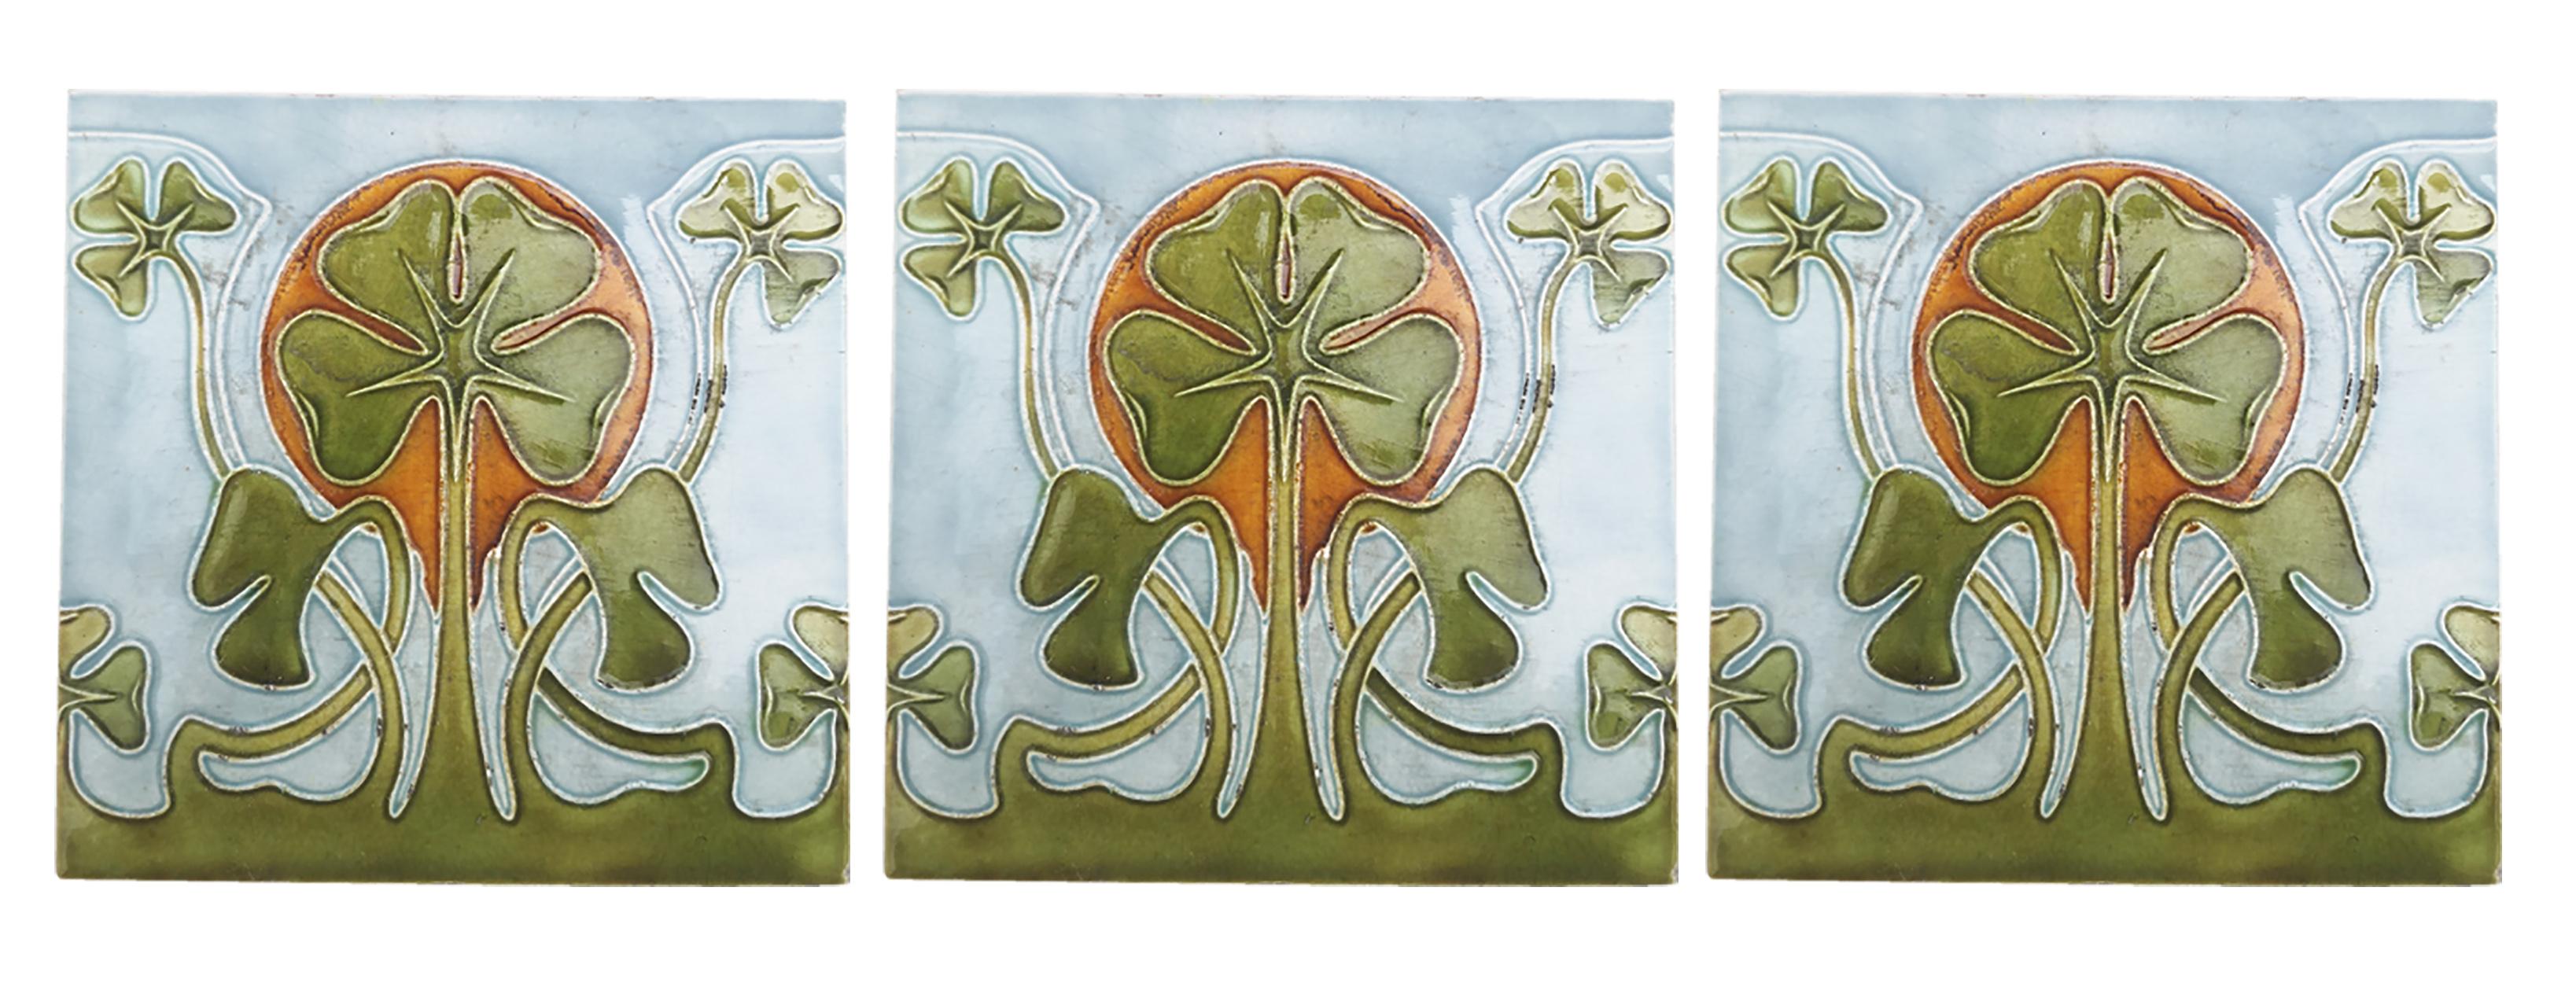 This is an amazing set of antique Art Nouveau handmade tiles 1920s. 
A beautiful relief and deep green, and brown color and light blue and white back ground. These tiles would be charming displayed on easels, framed or incorporated into a custom